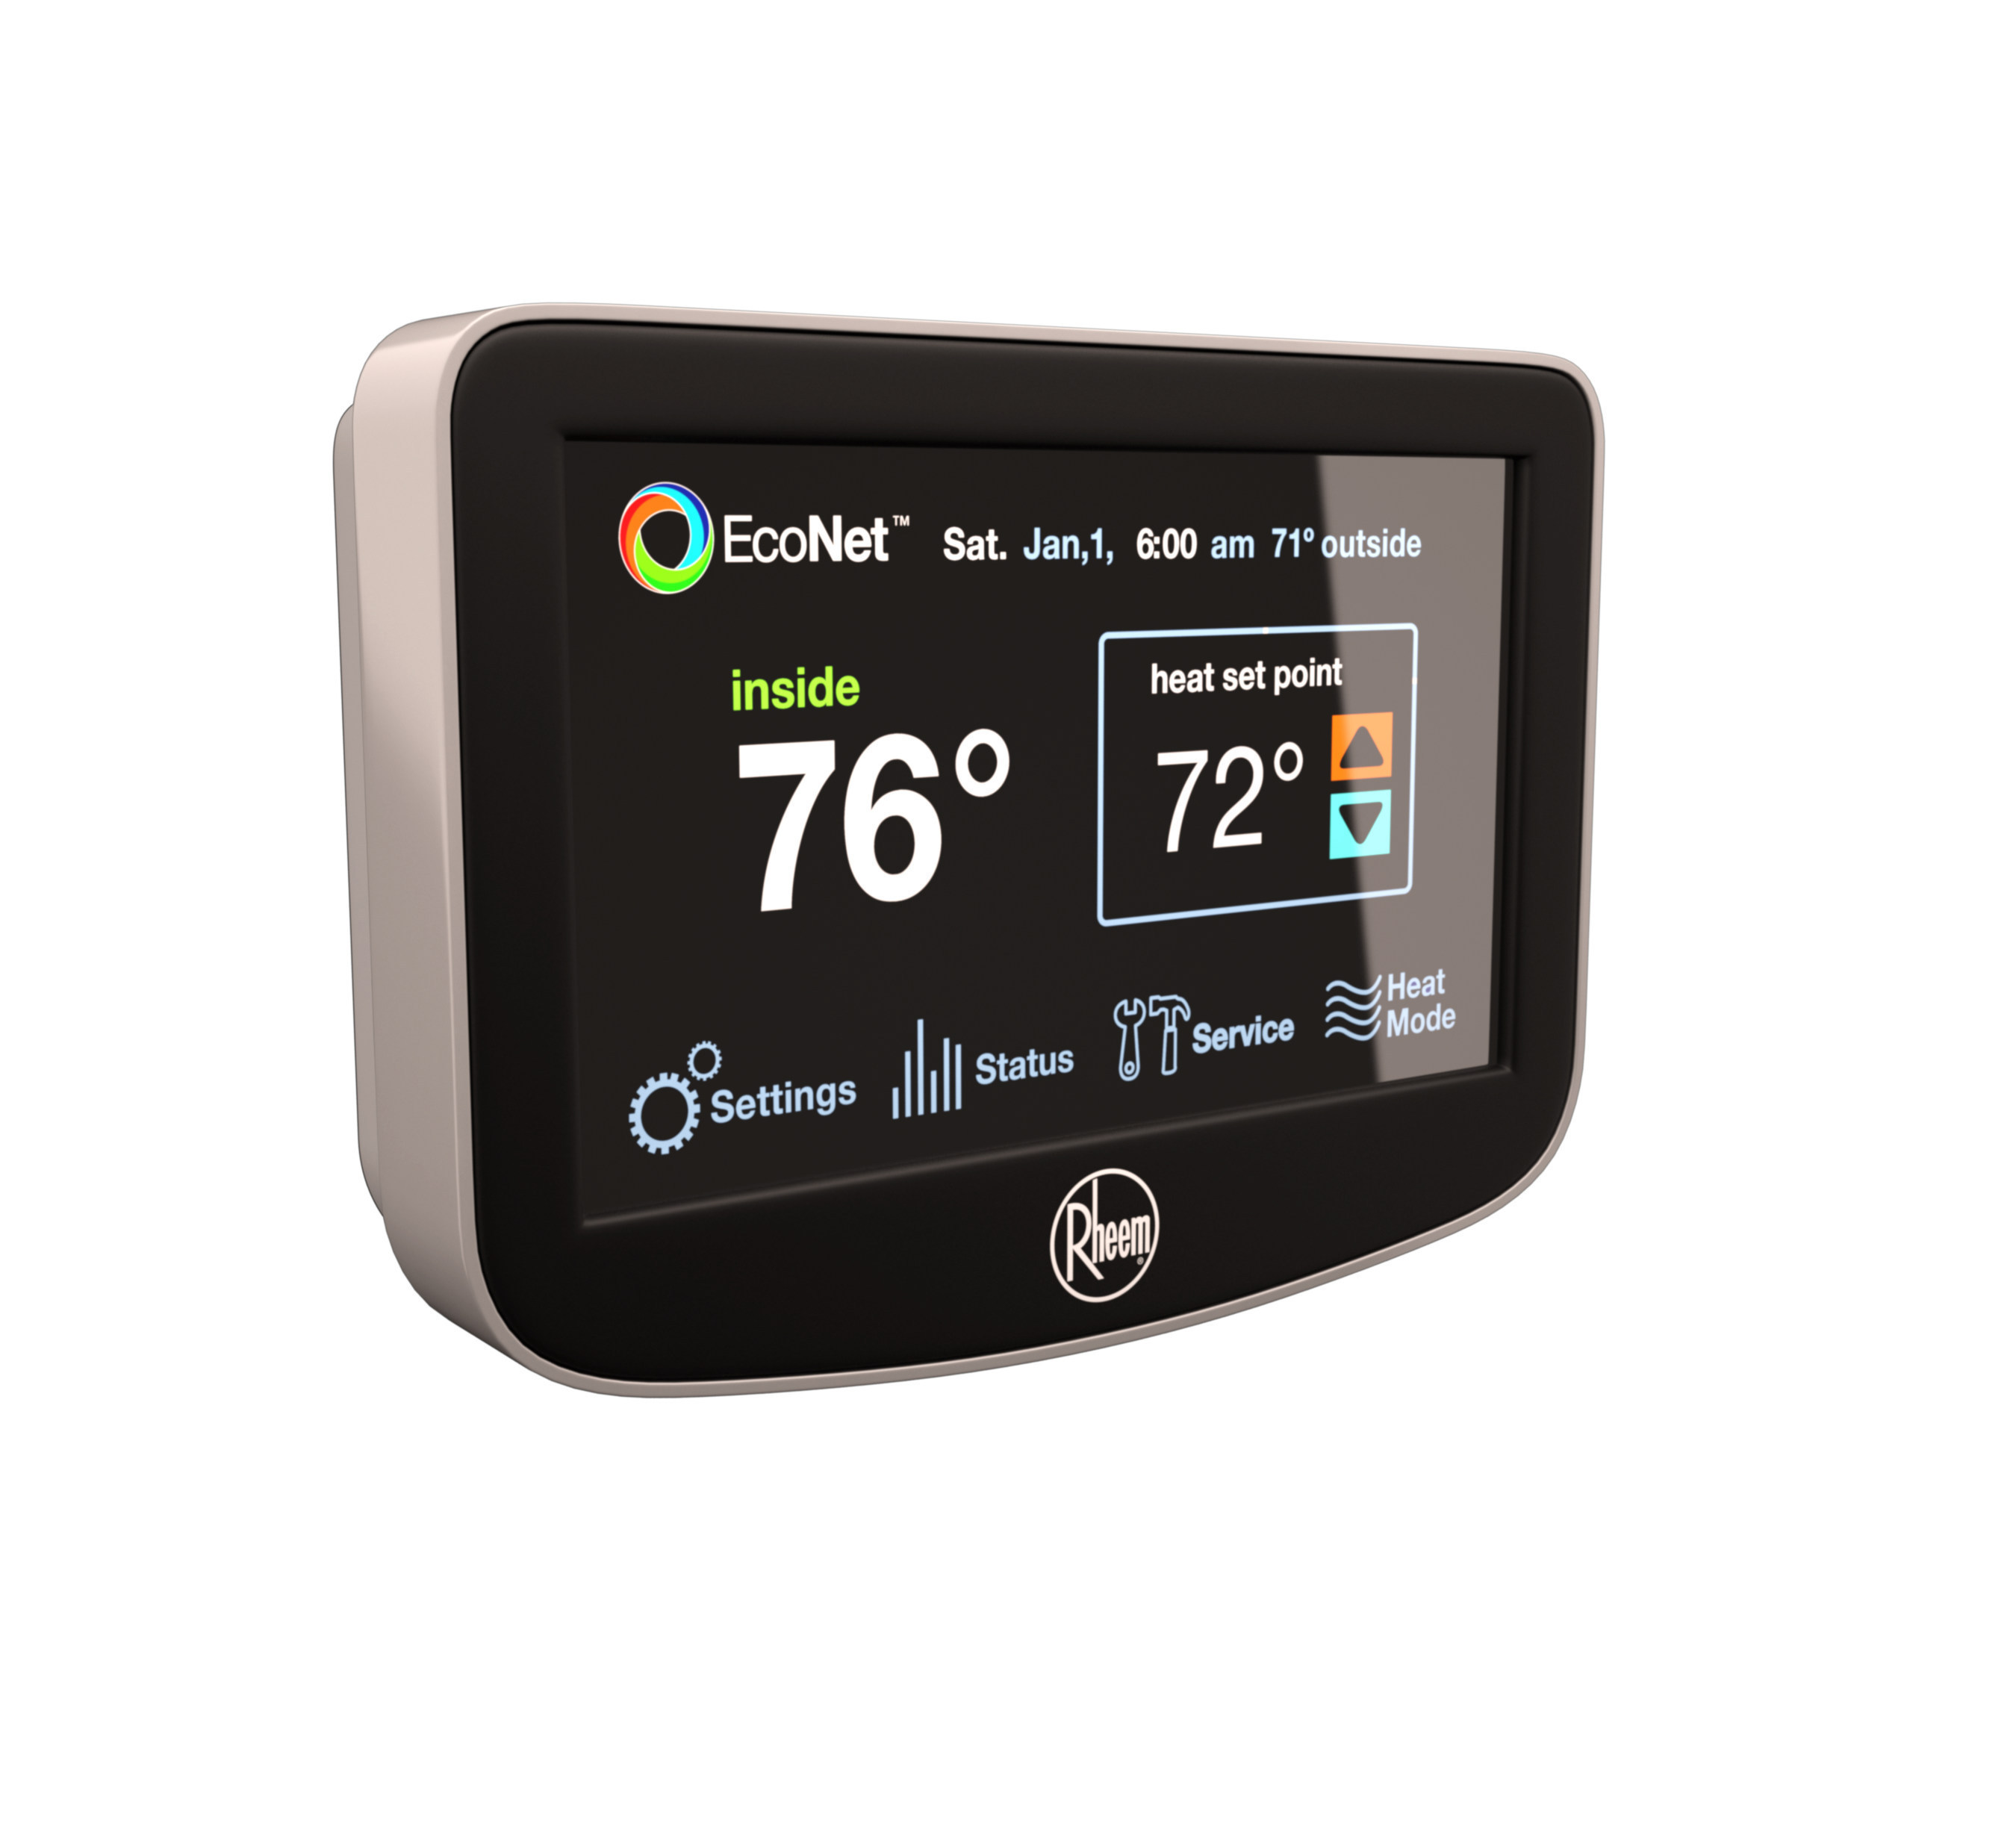 Homeowners can manage their EcoNet system through a smart thermostat, shown here, or a free mobile app available on both both iOS and Android platforms.